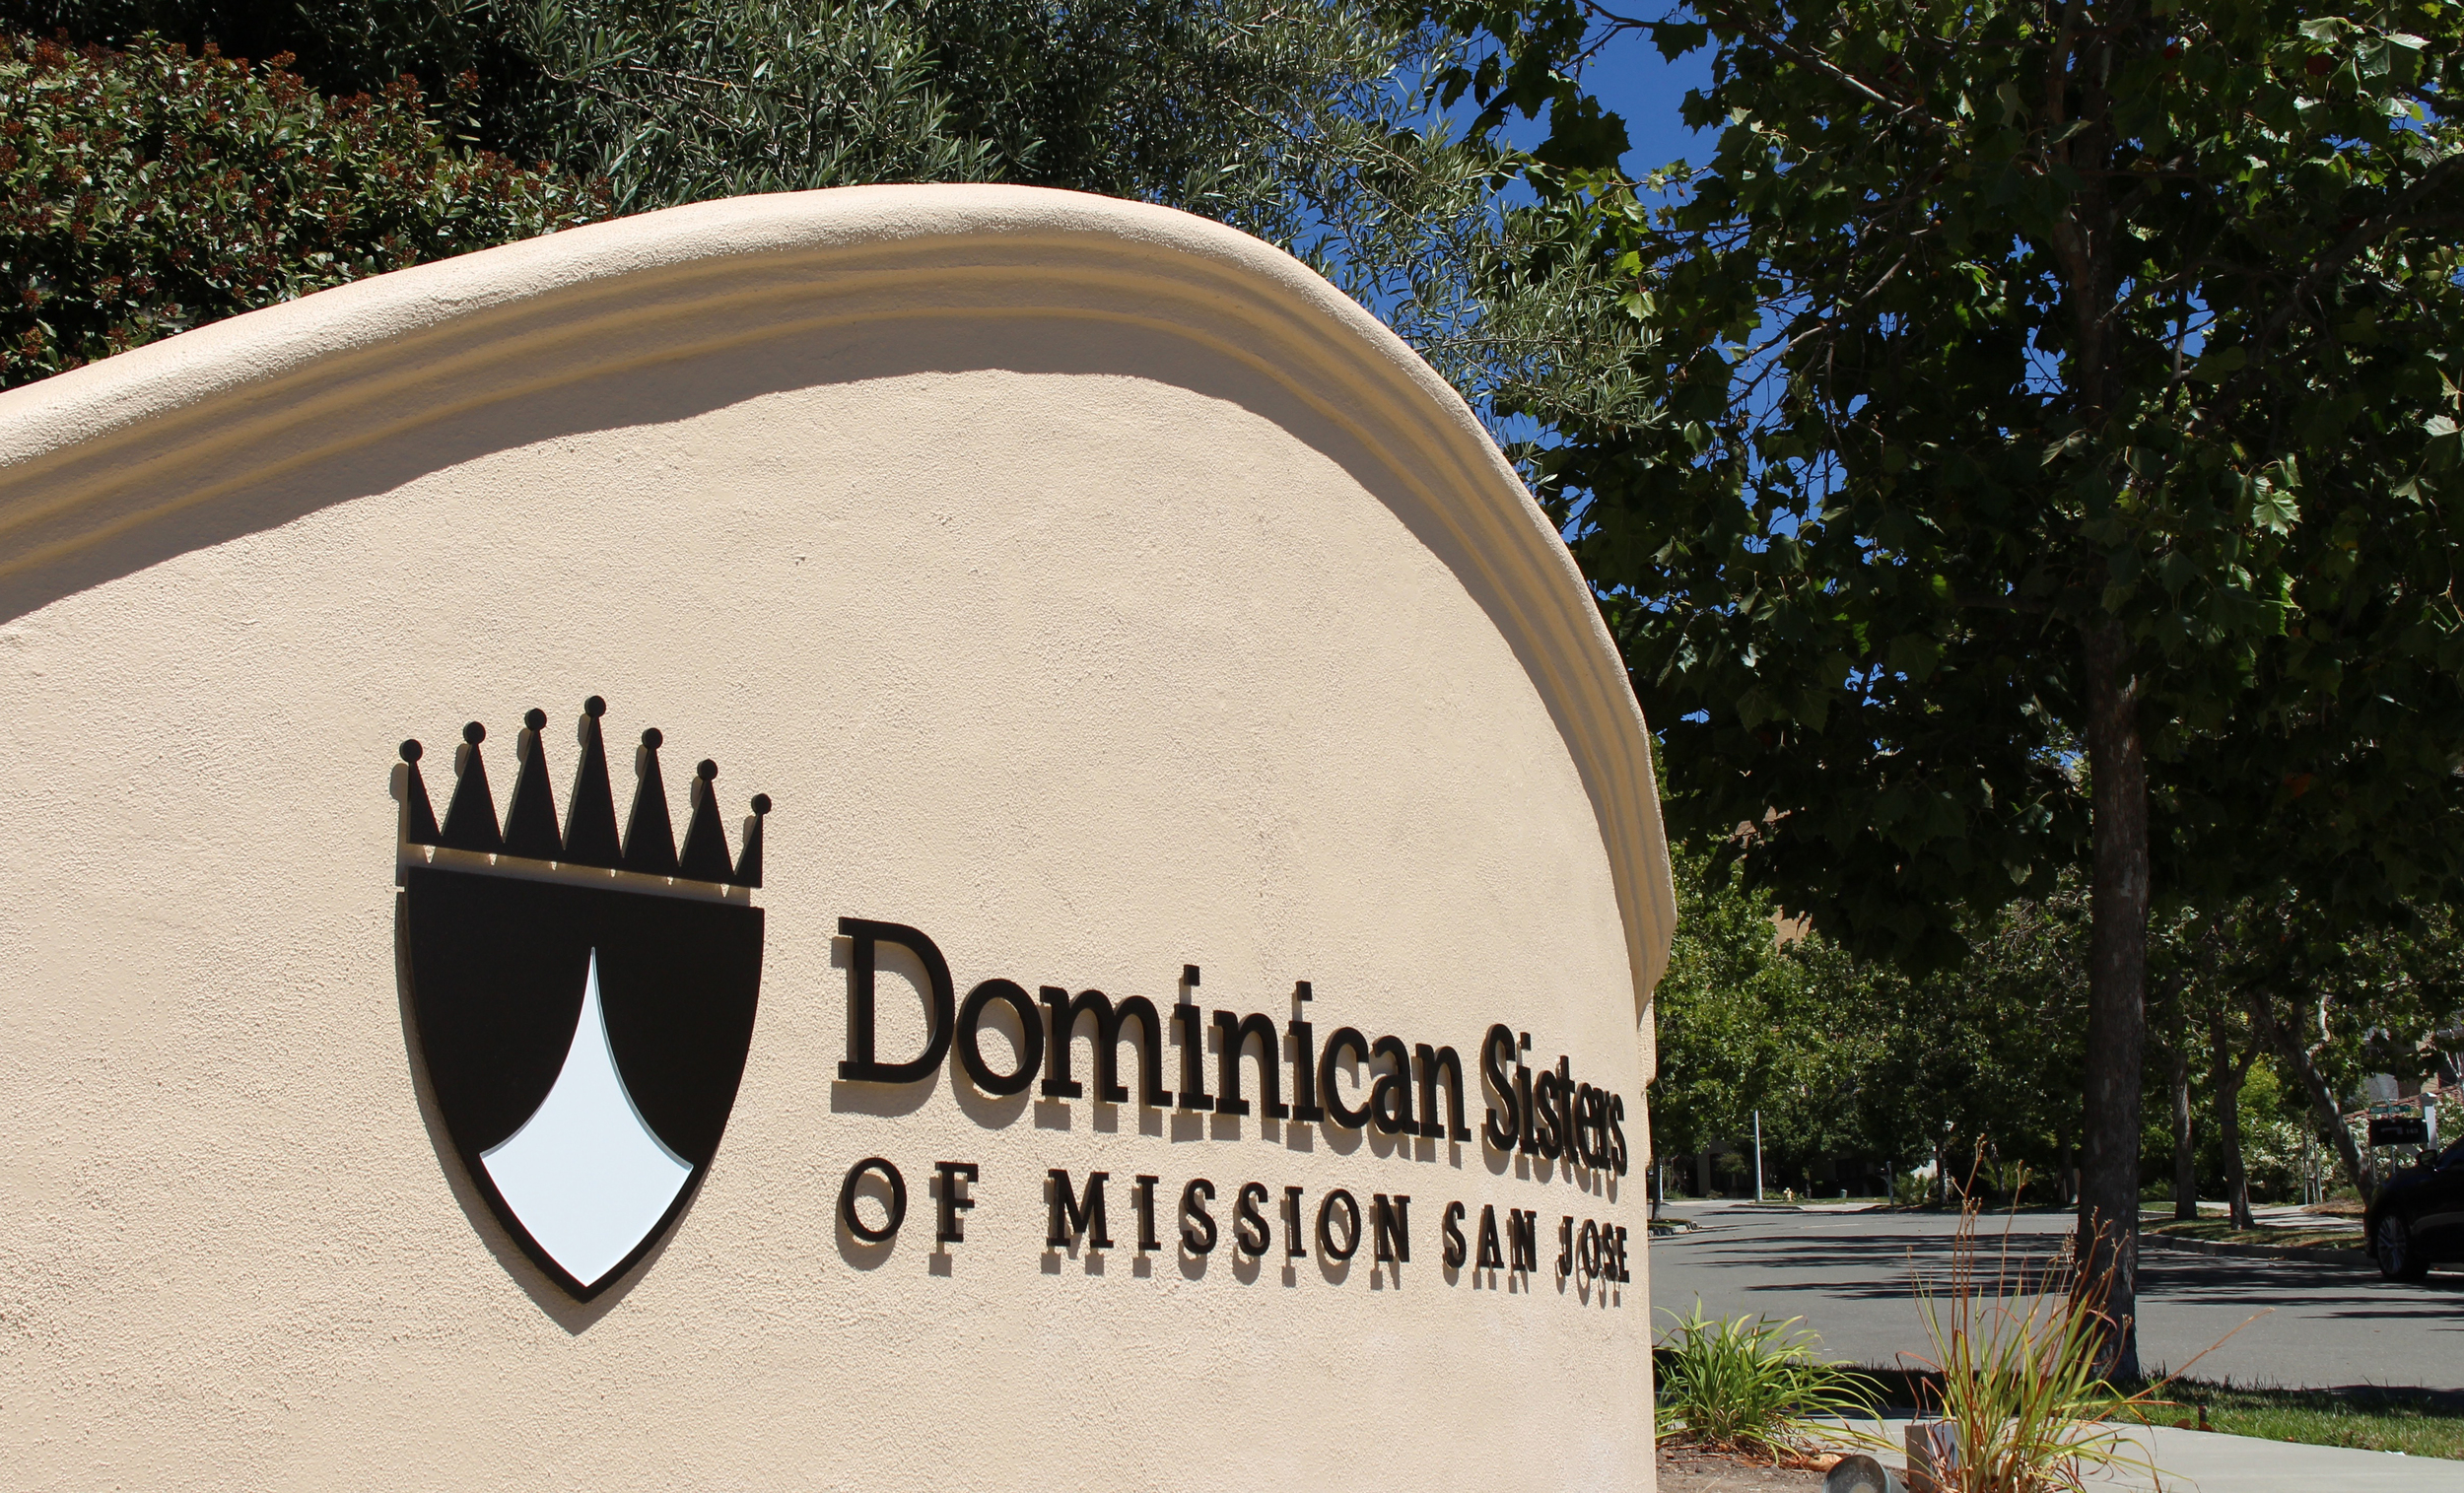 Dominican Sisters Mission San Jose